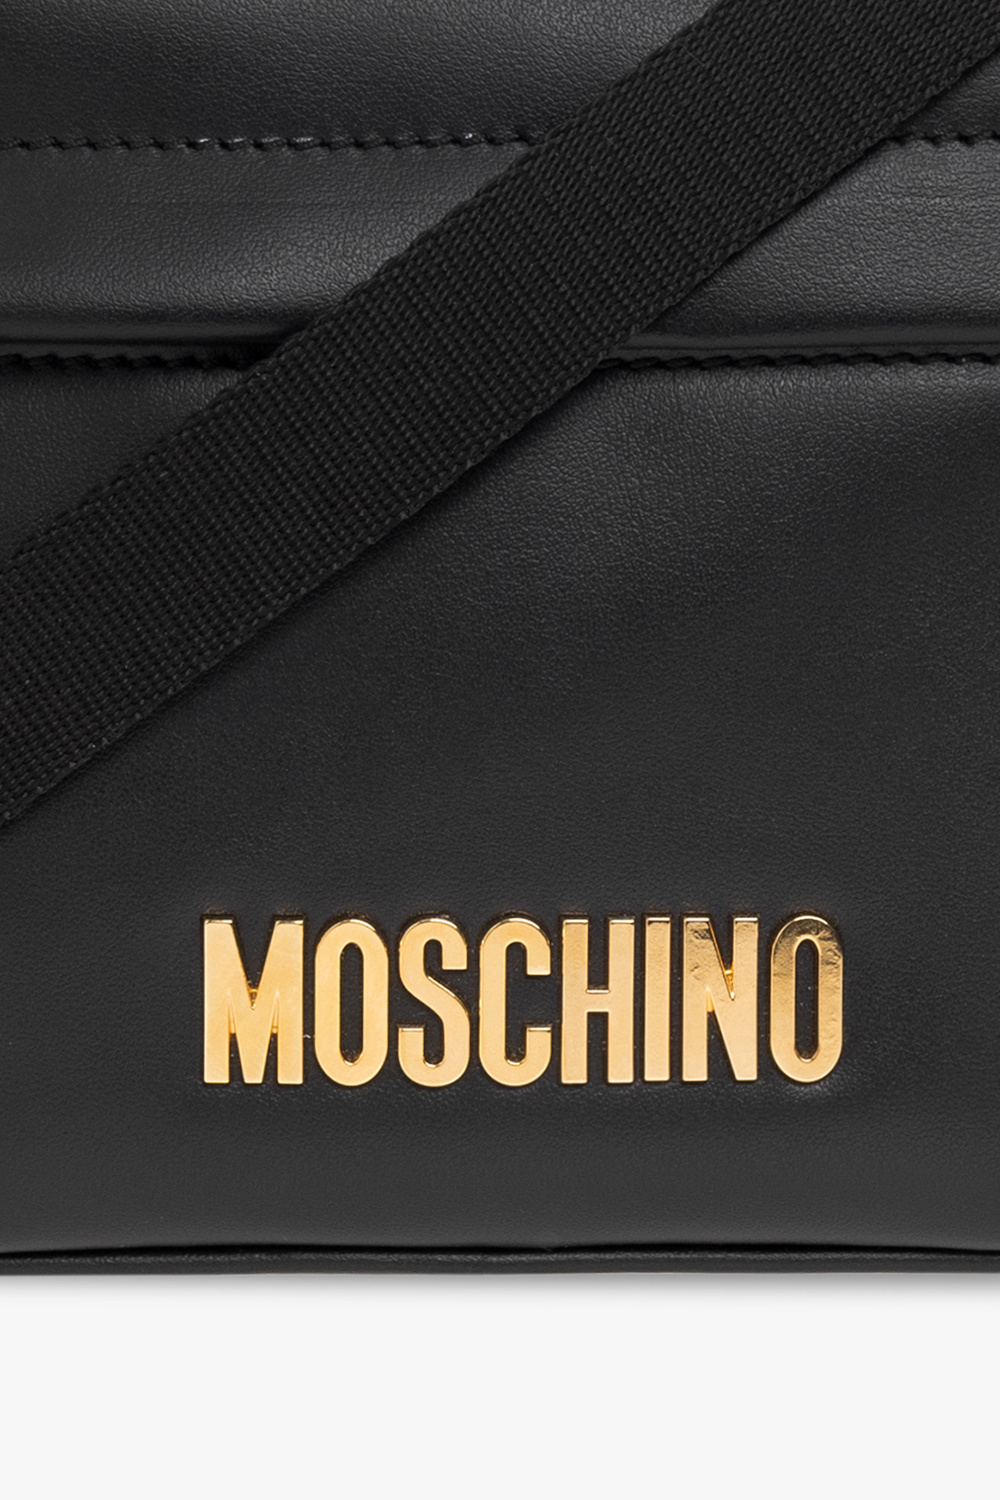 Moschino most popular bags